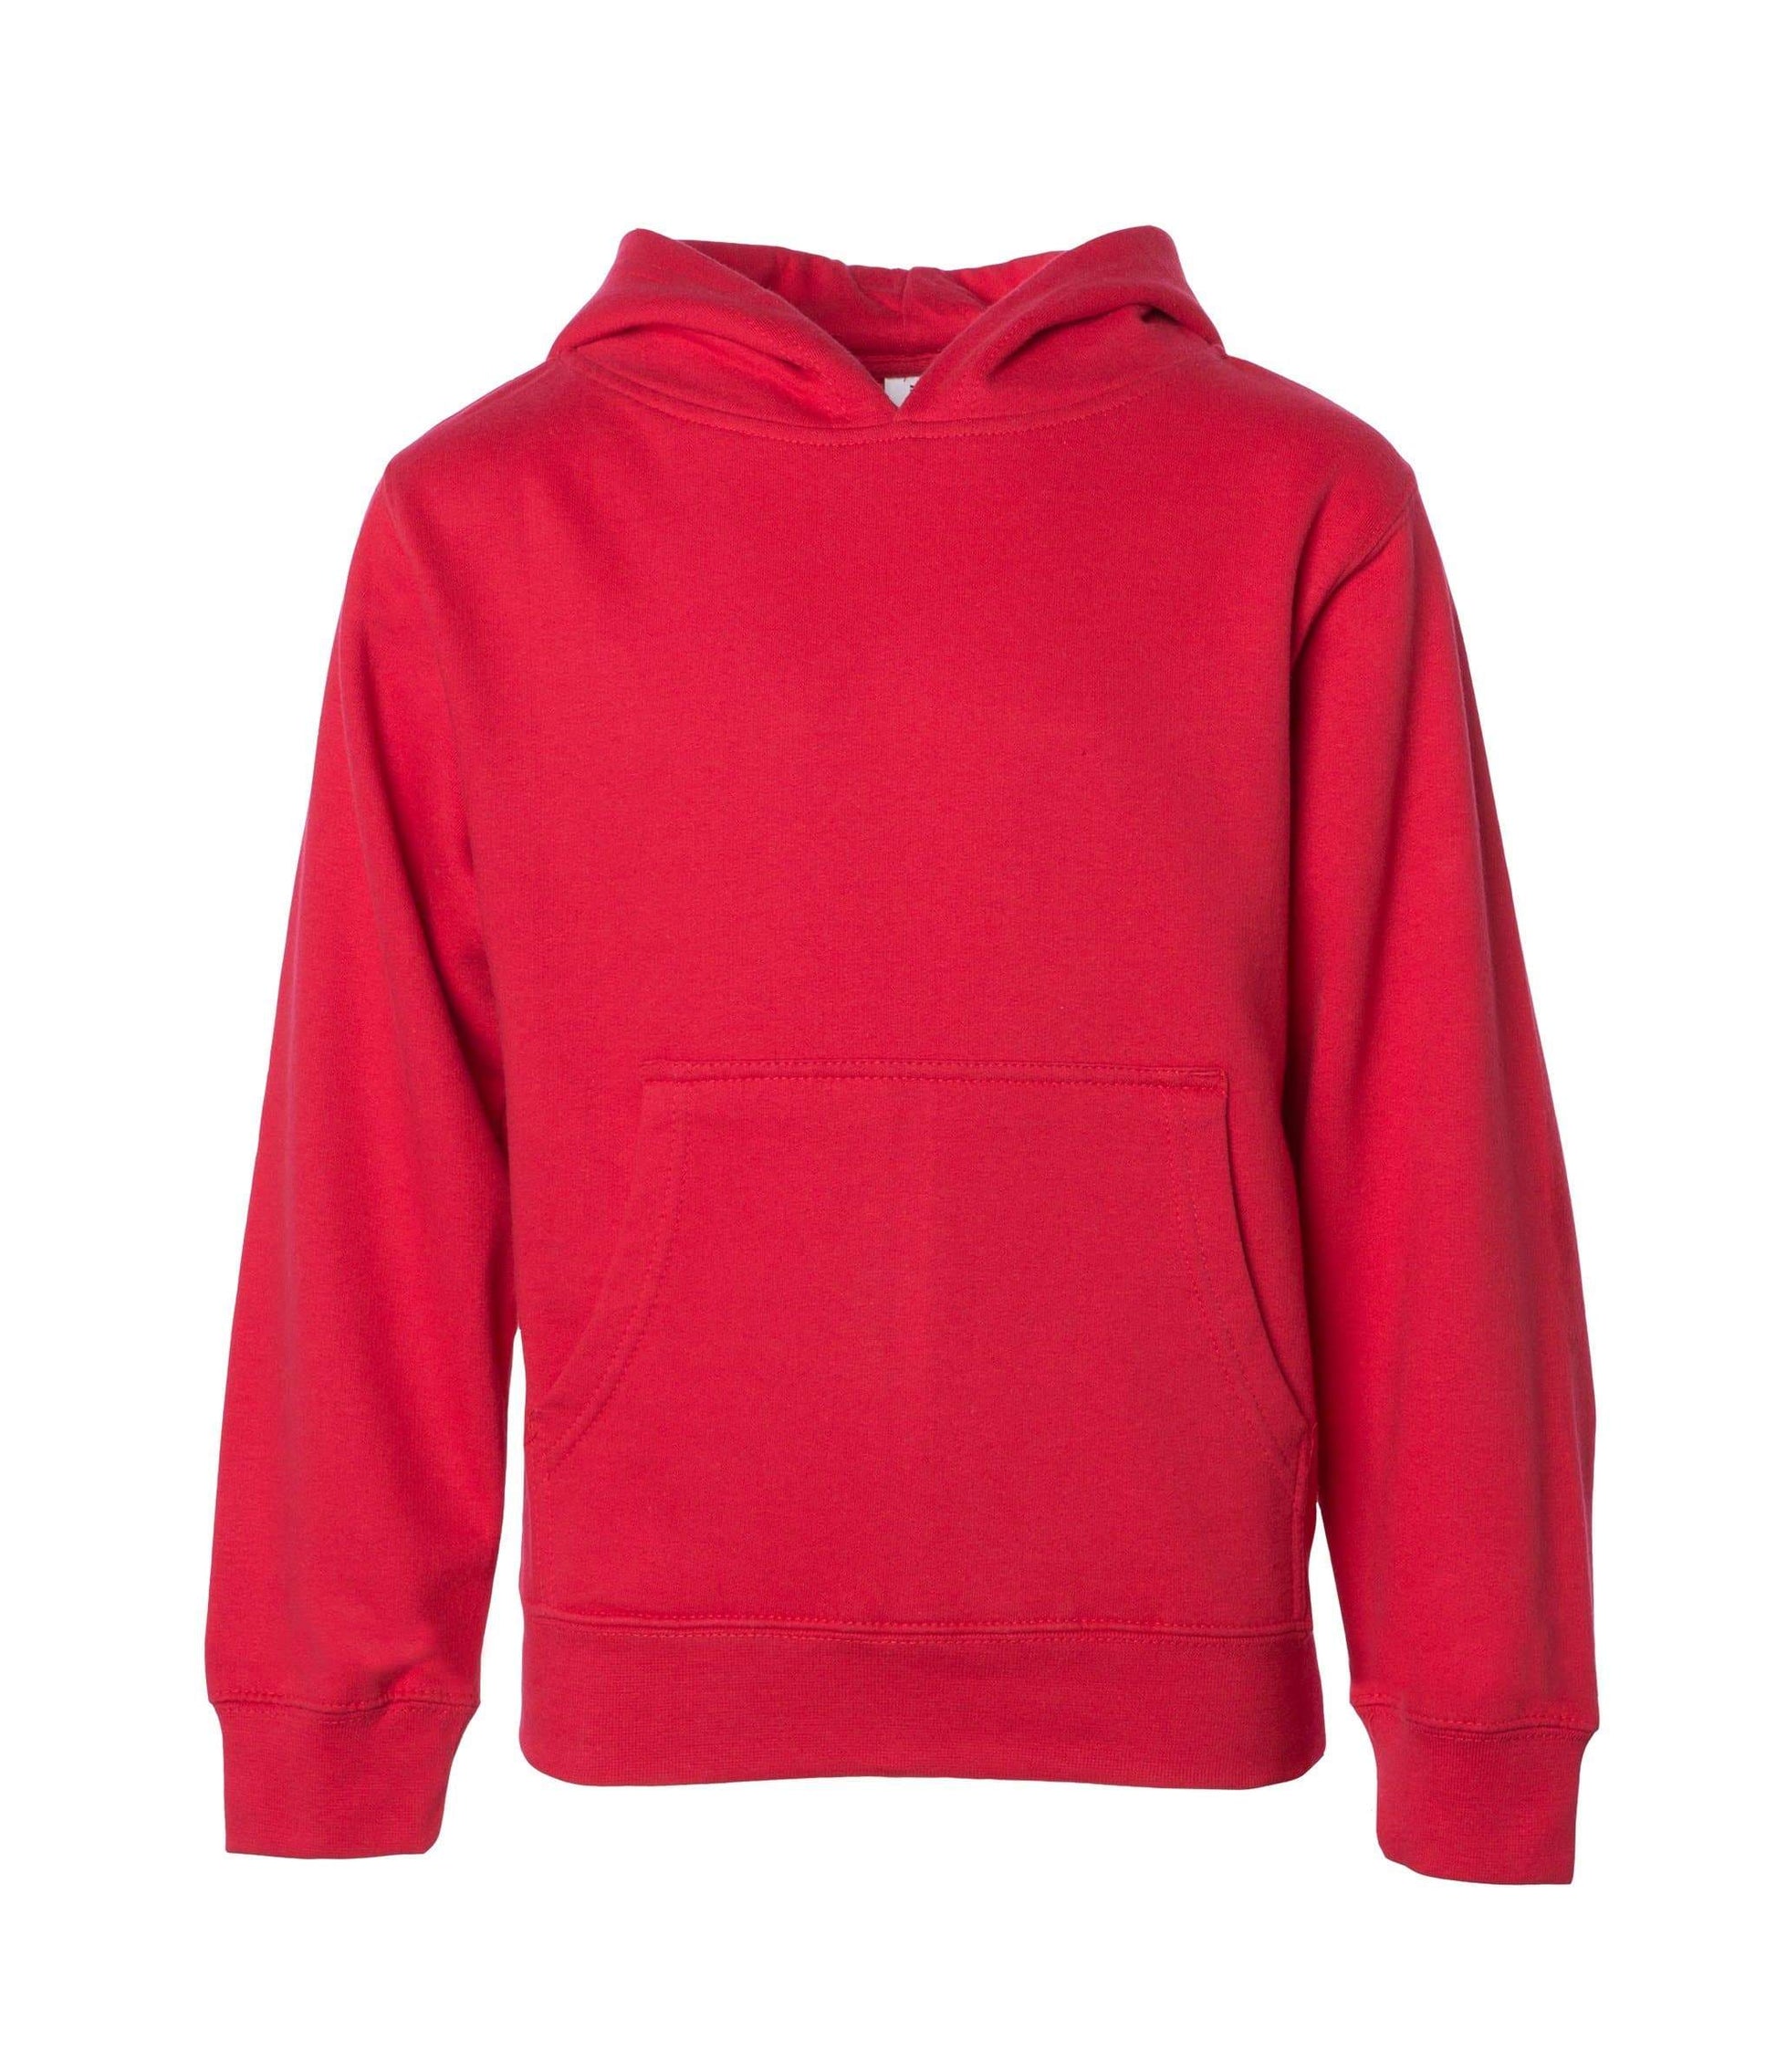 SS4001Y Youth Midweight Pullover Hooded Sweatshirt - Red